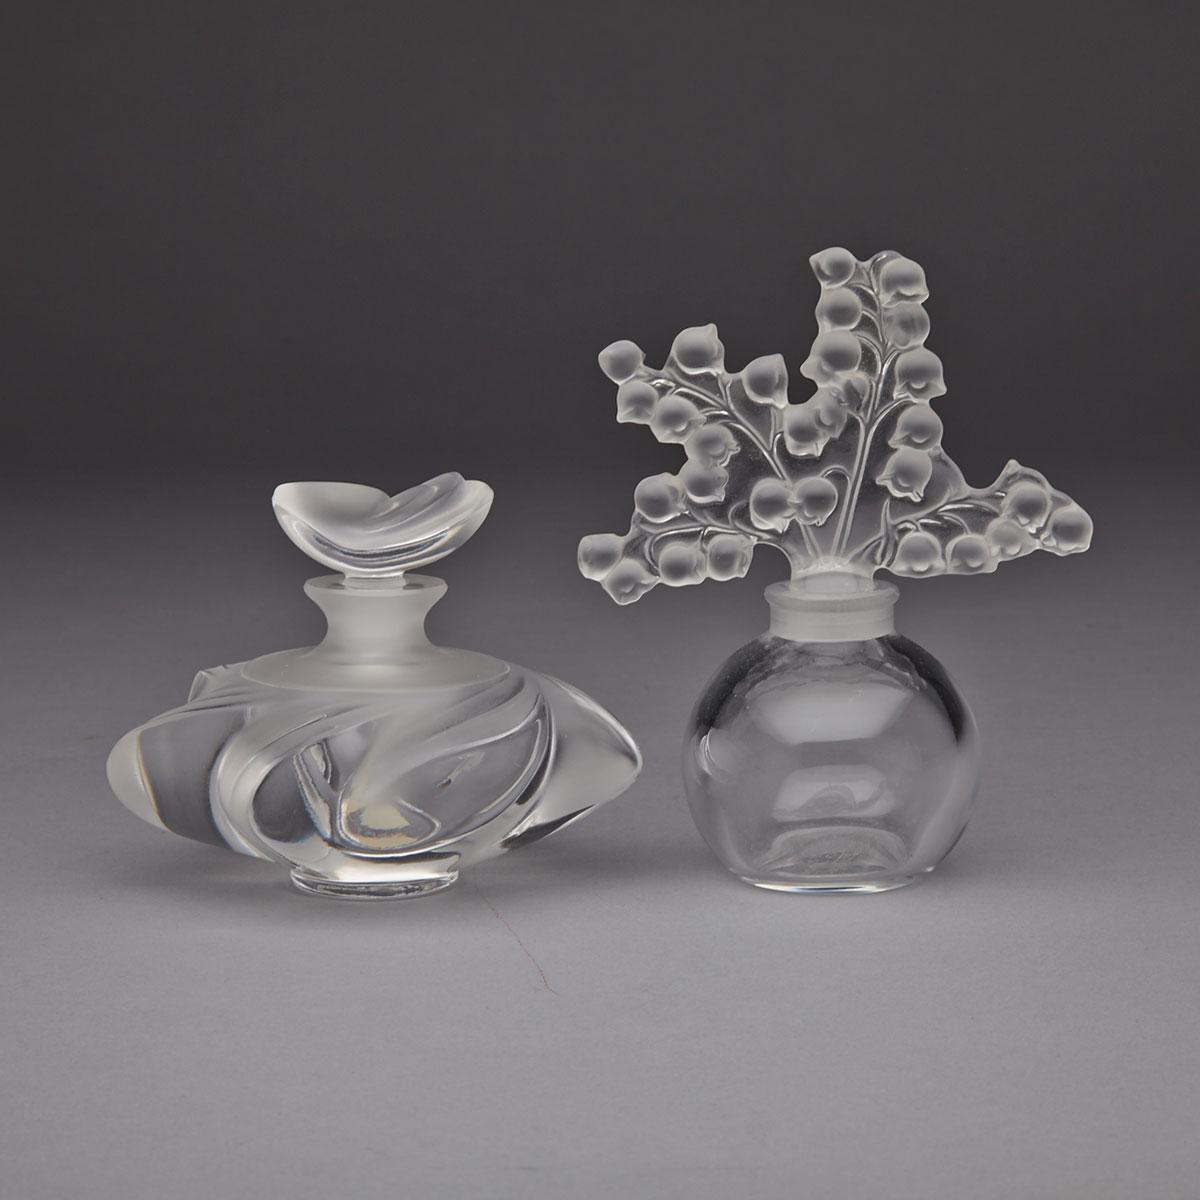 ‘Samoa’ and ‘Clairefontaine’, Two Lalique Moulded and Frosted Glass Perfume Bottles, 20th century